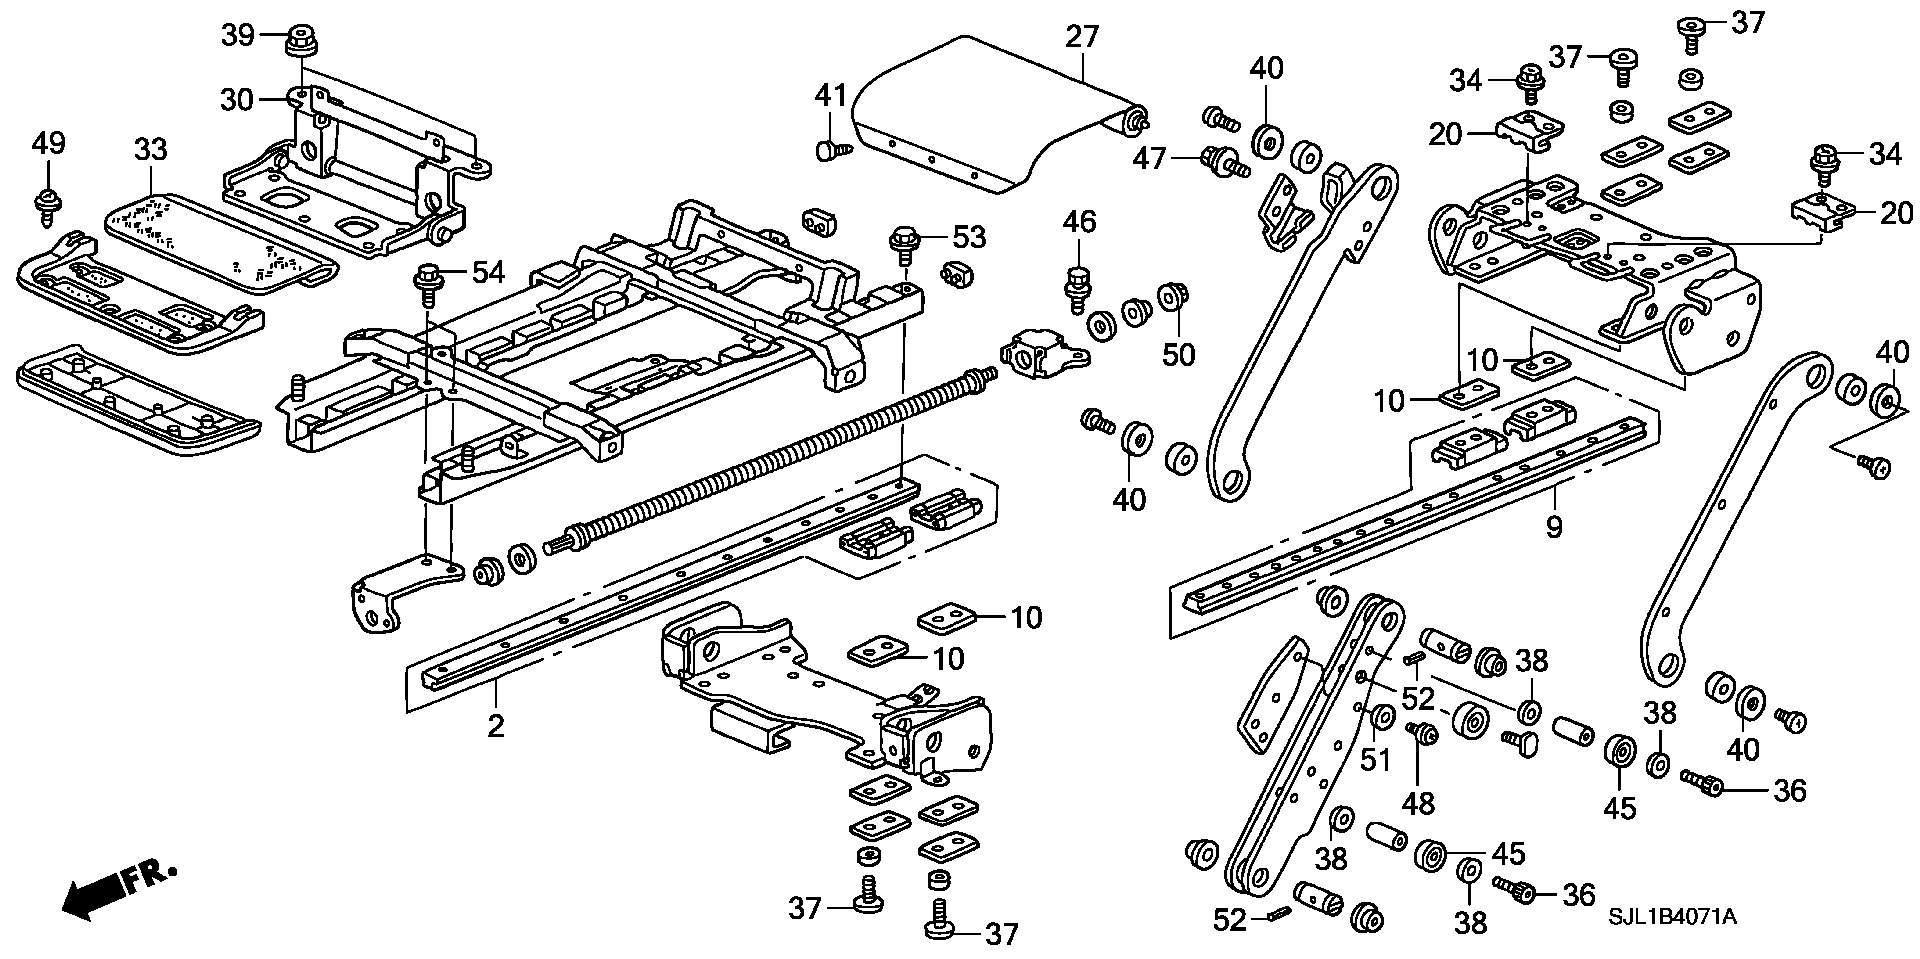 LIFTER  COMPONENT PARTS (1) ( SIDE LIFT UP SEAT)